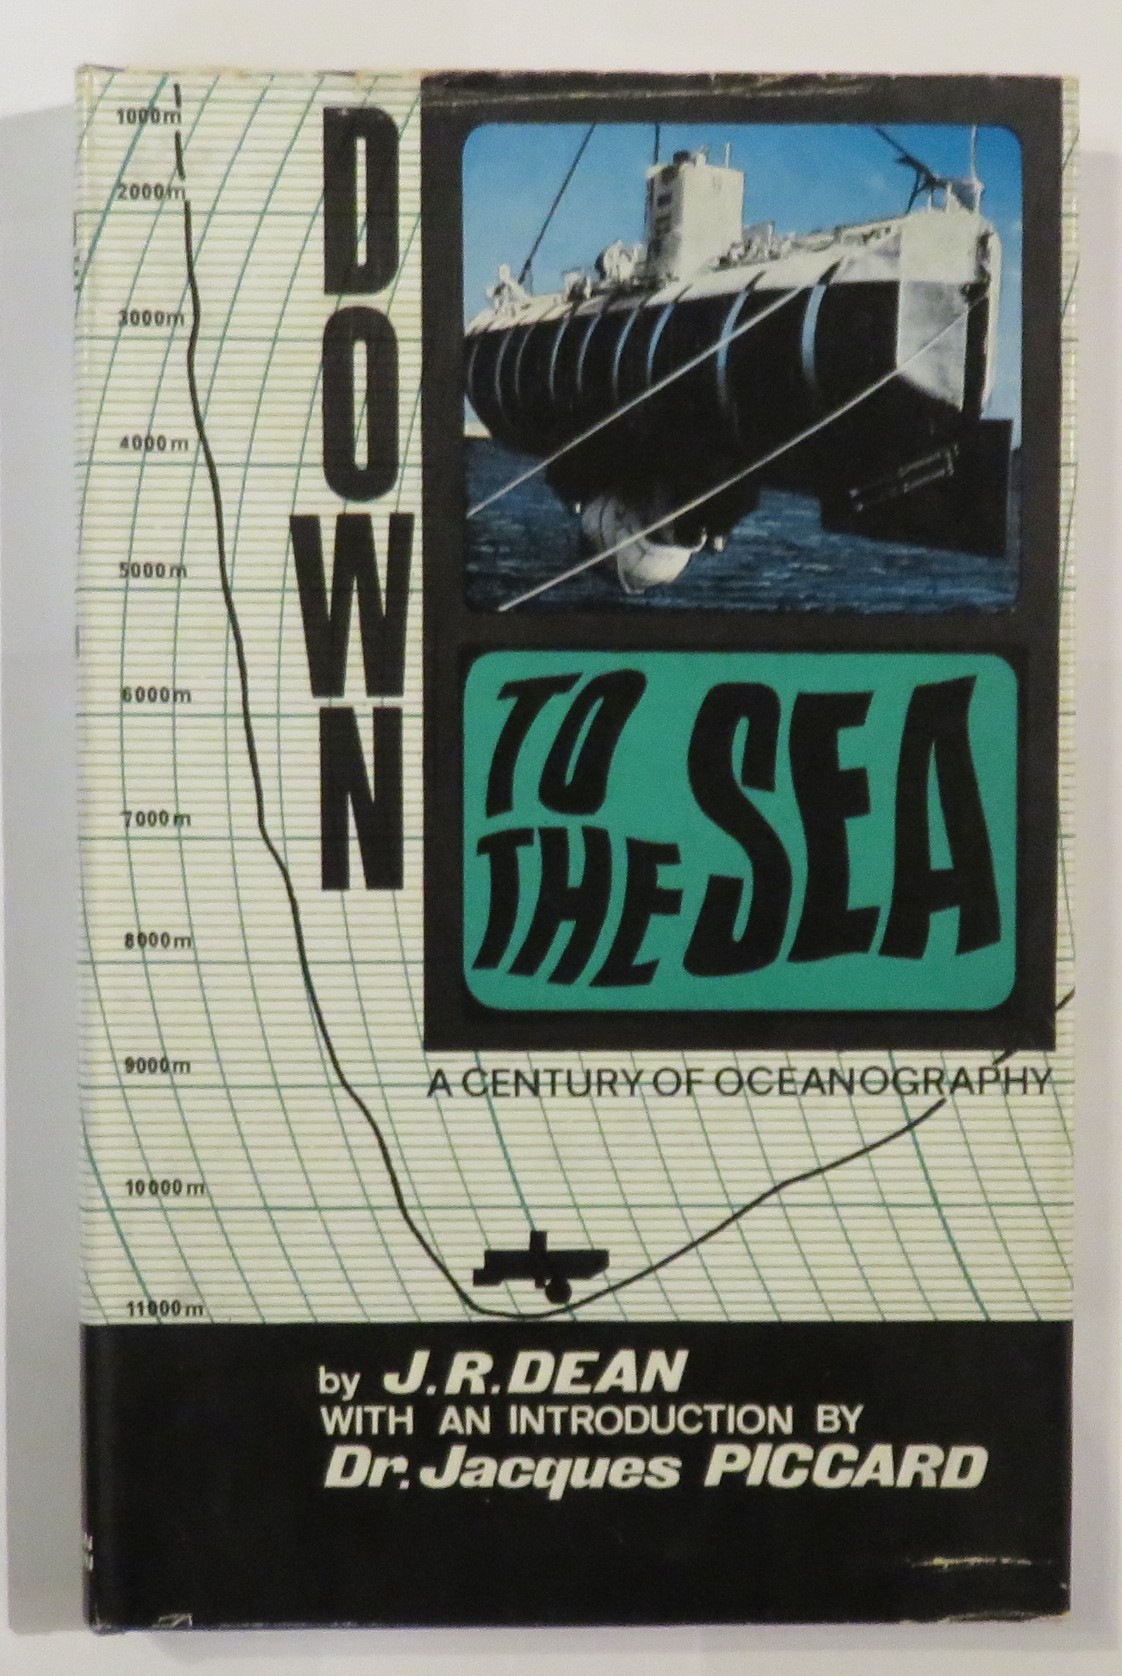 Down to the Sea: A Century of Oceanography